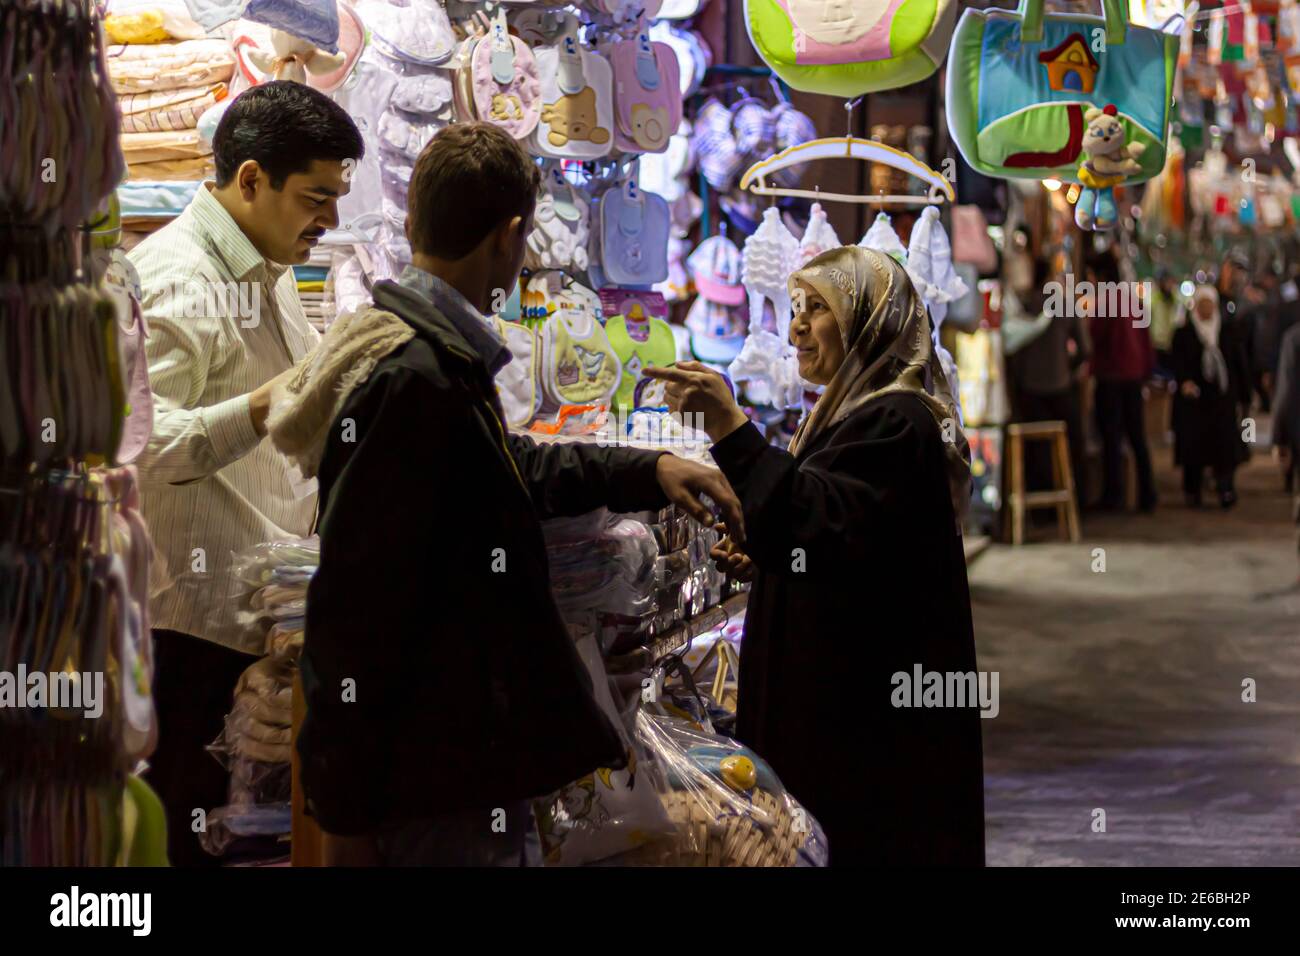 Damascus, Syria 03-28-2010: An Arabic woman wearing hijab is shopping at an apparel and baby clothing store in the historic Al Hamidiyah Souq. She is Stock Photo